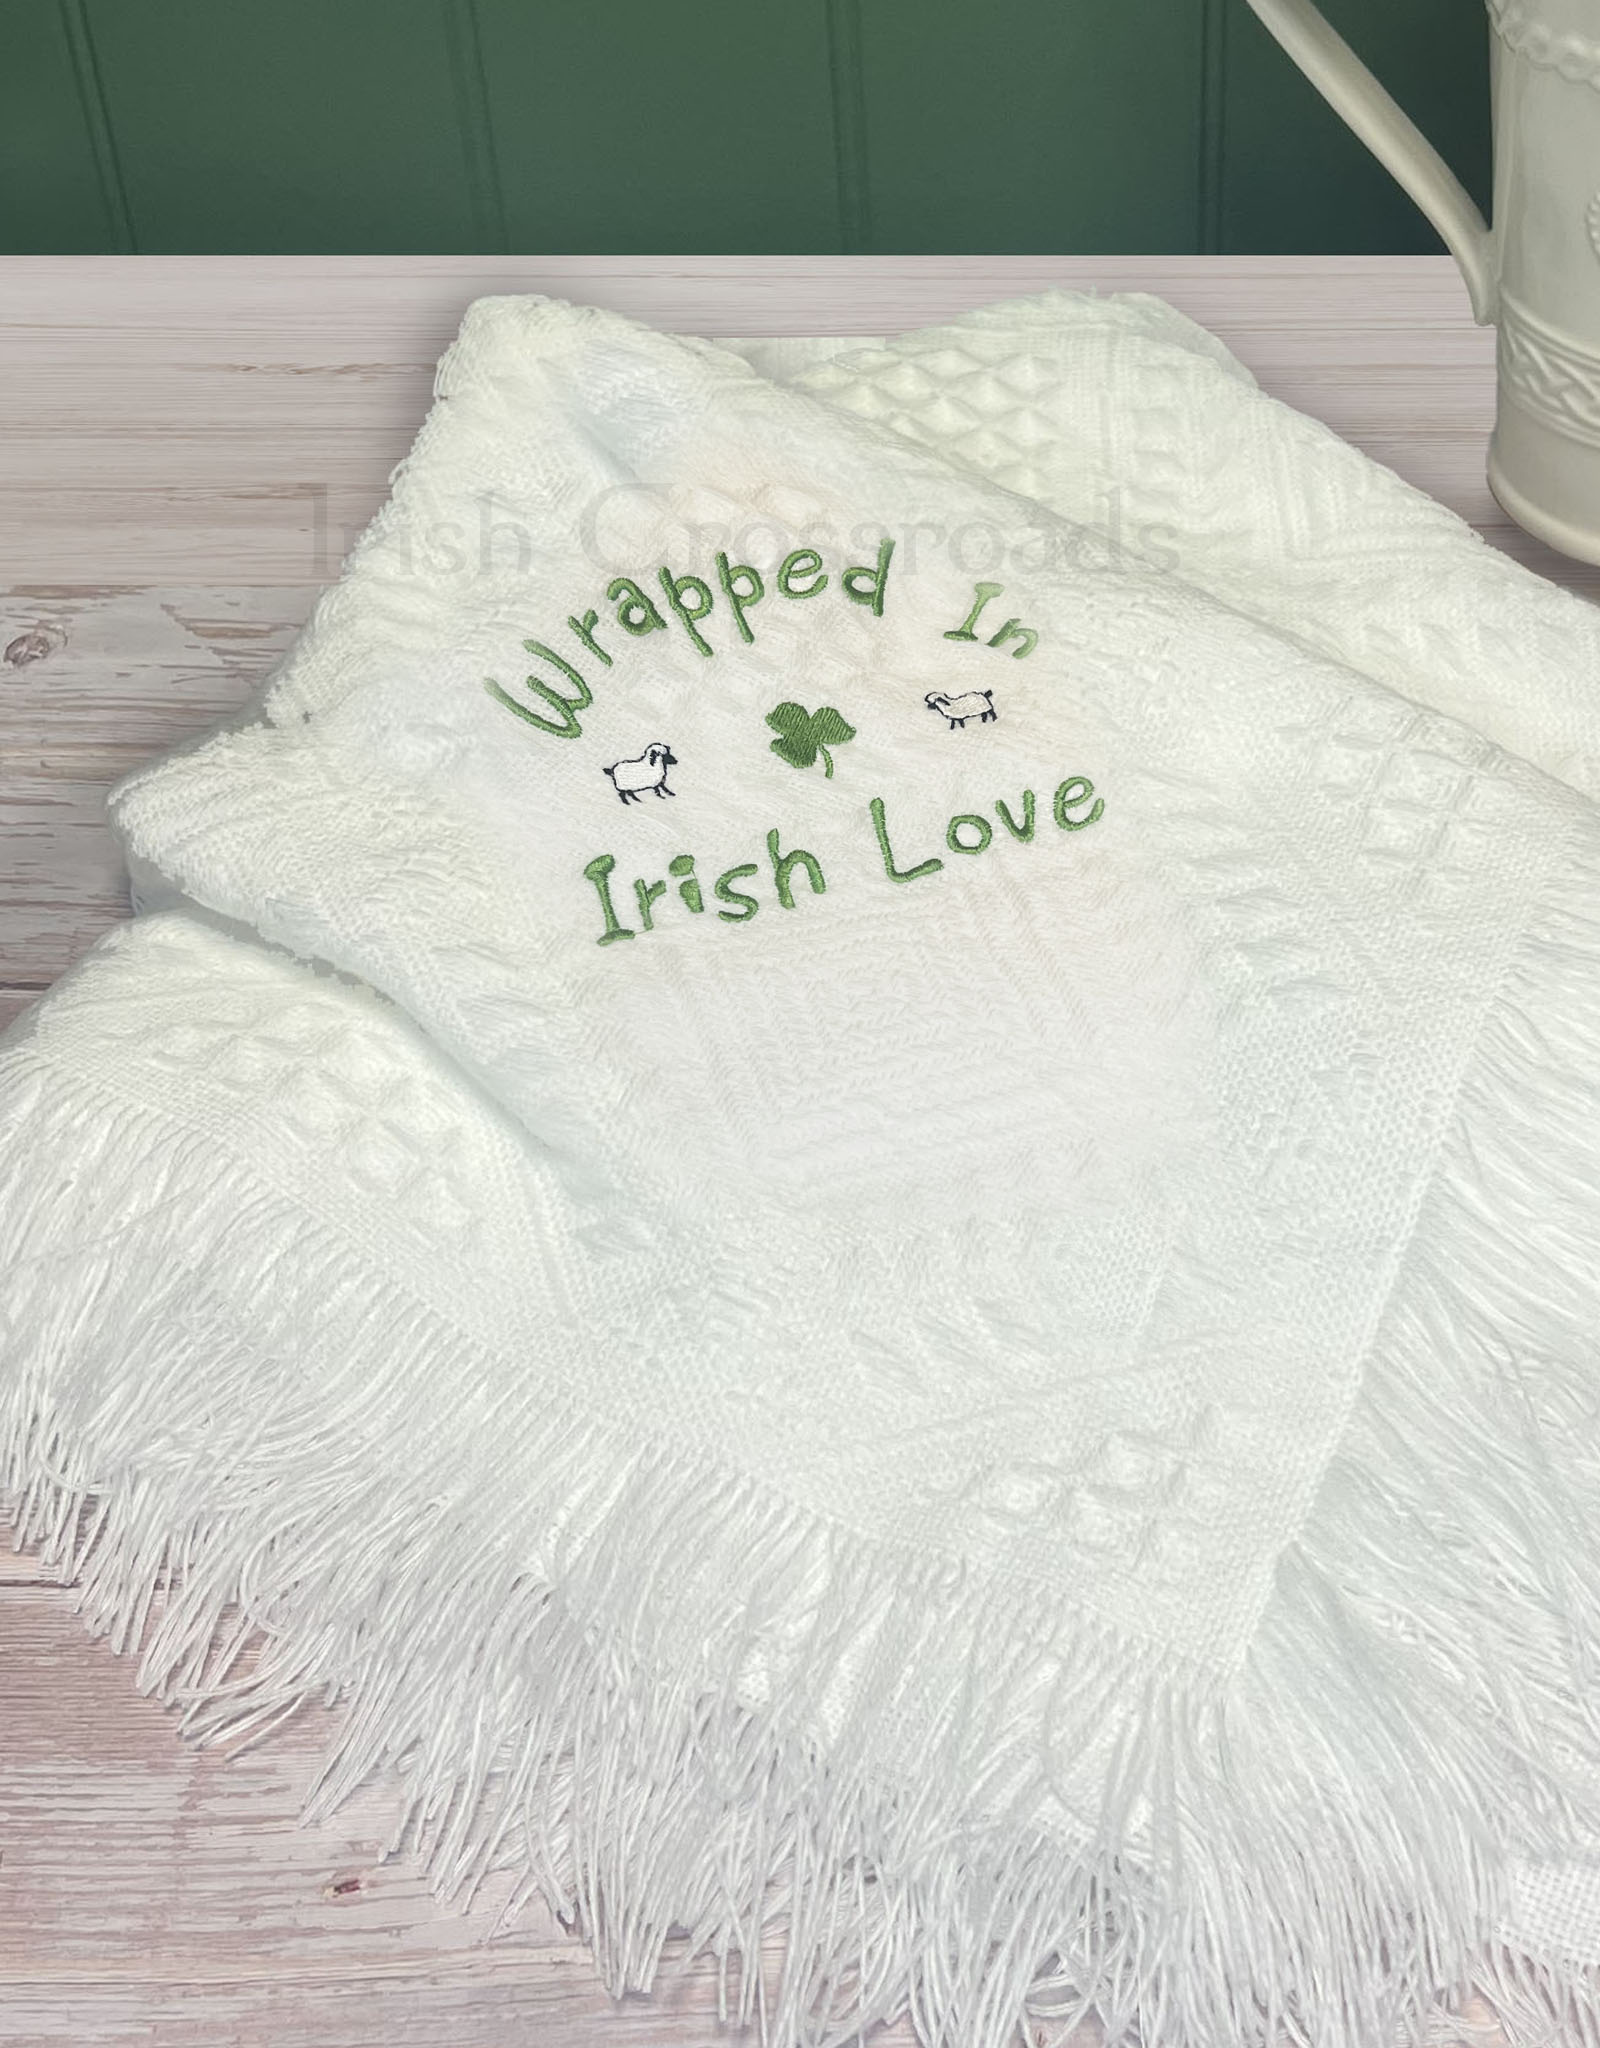 BABY BLANKETS “WRAPPED in IRISH LOVE” BABY BLANKET